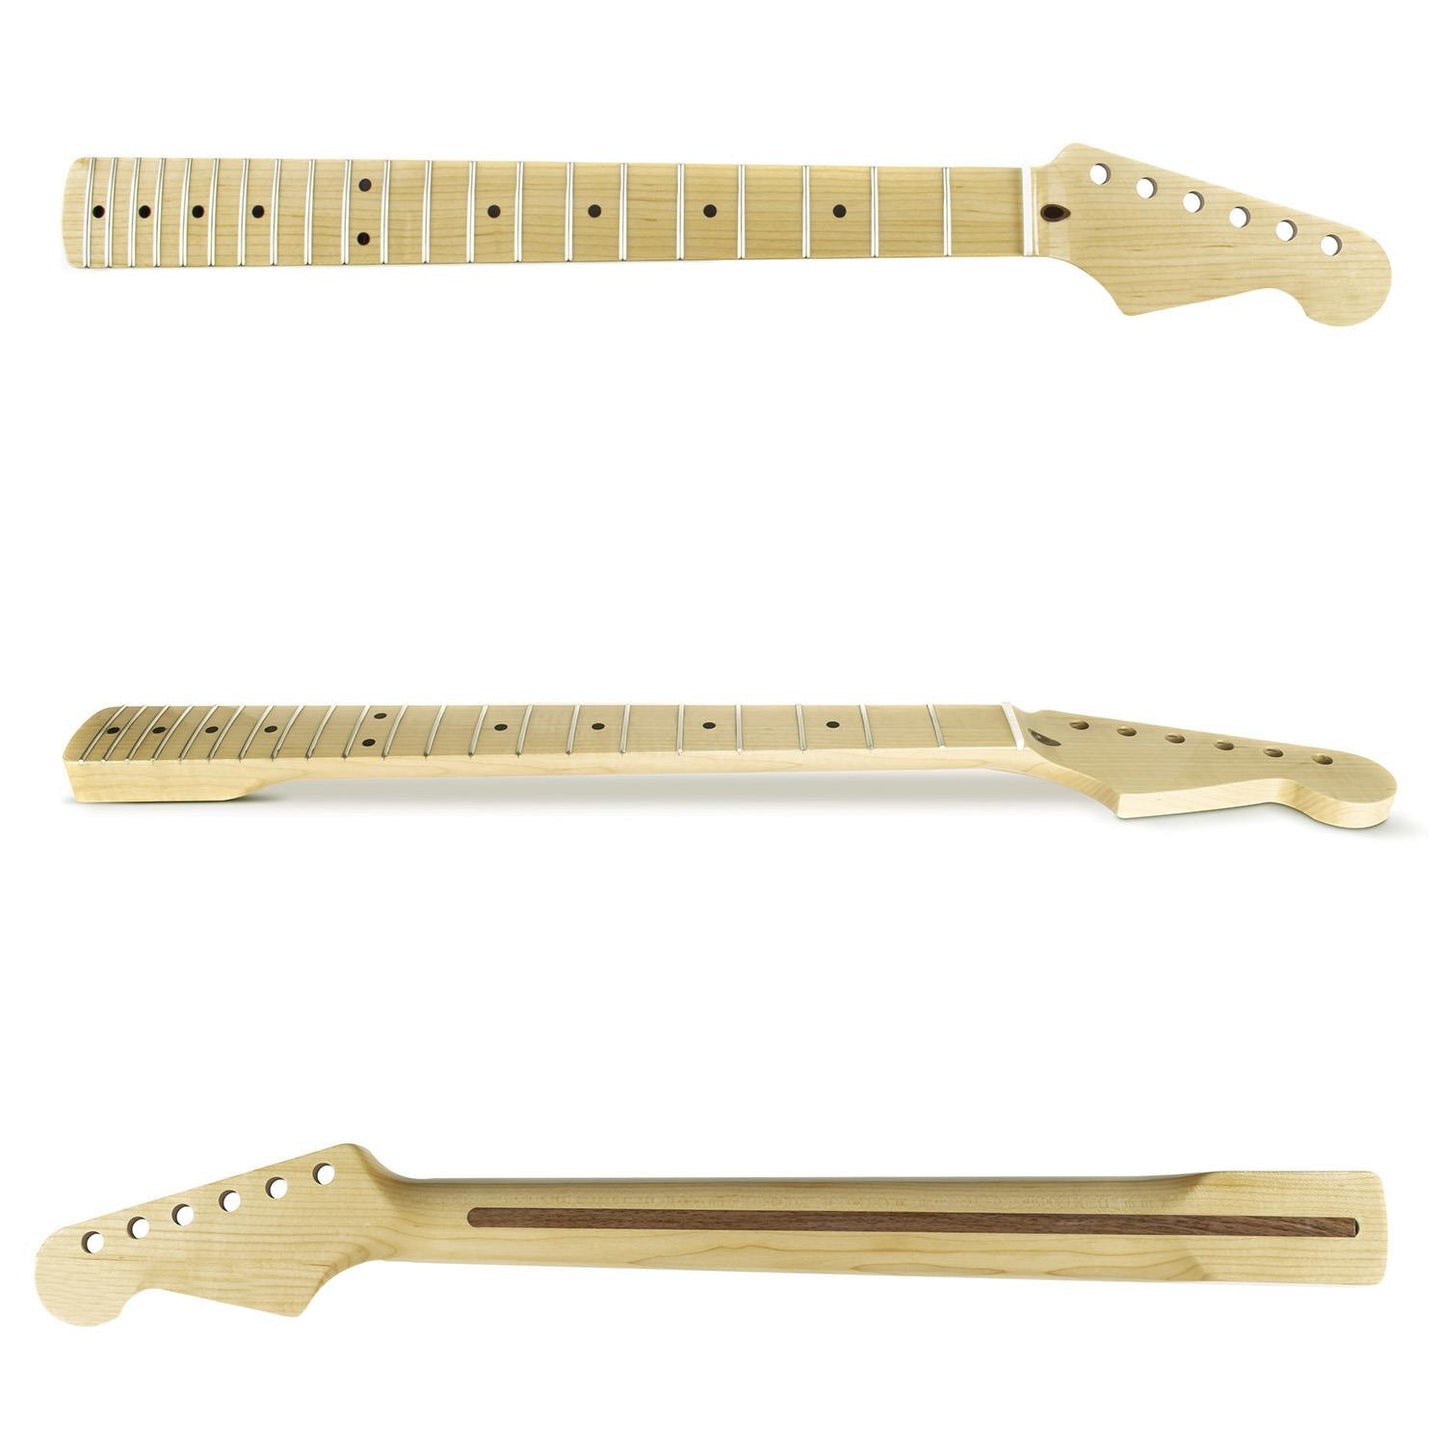 Stratocaster Compatible Guitar Neck -  Natural Gloss